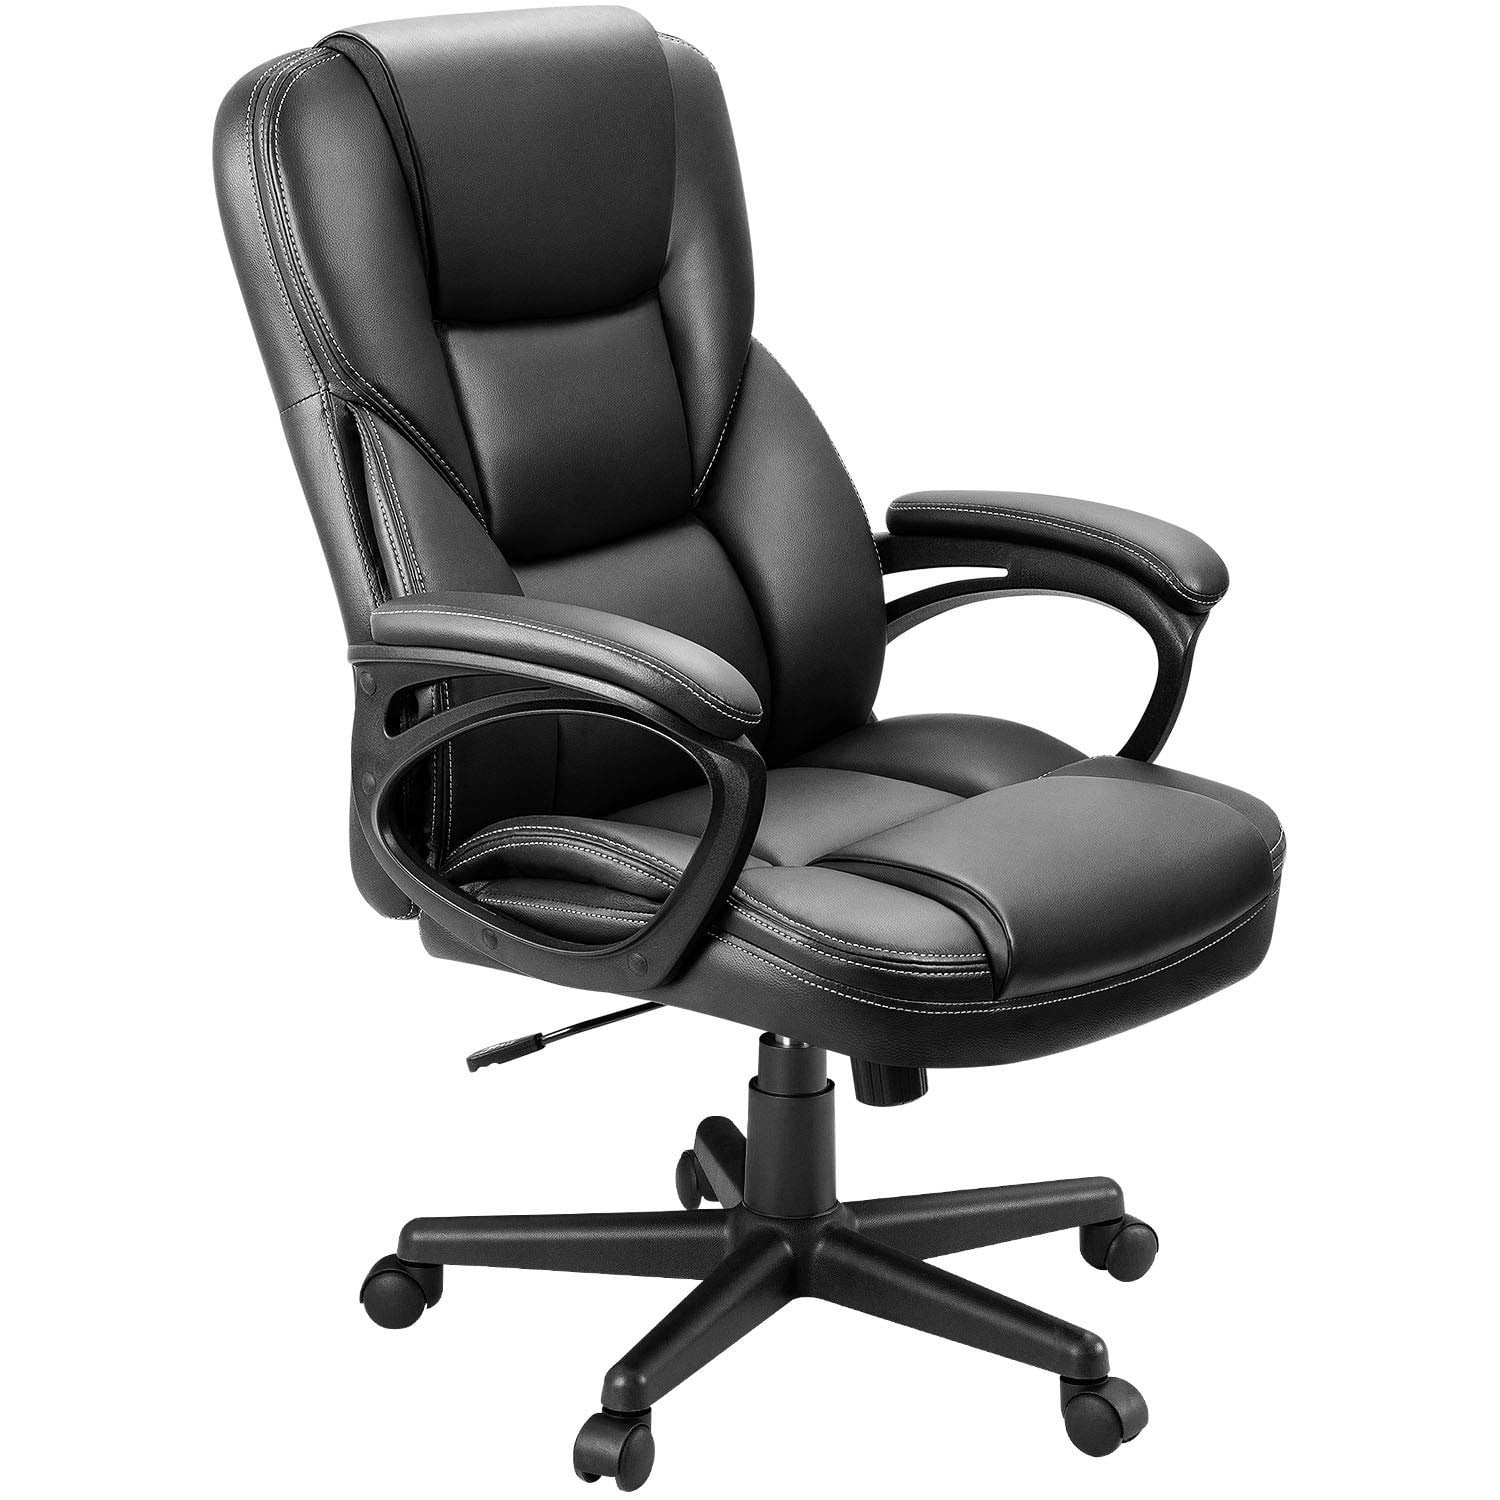 Total 78+ imagen black leather office chair high back